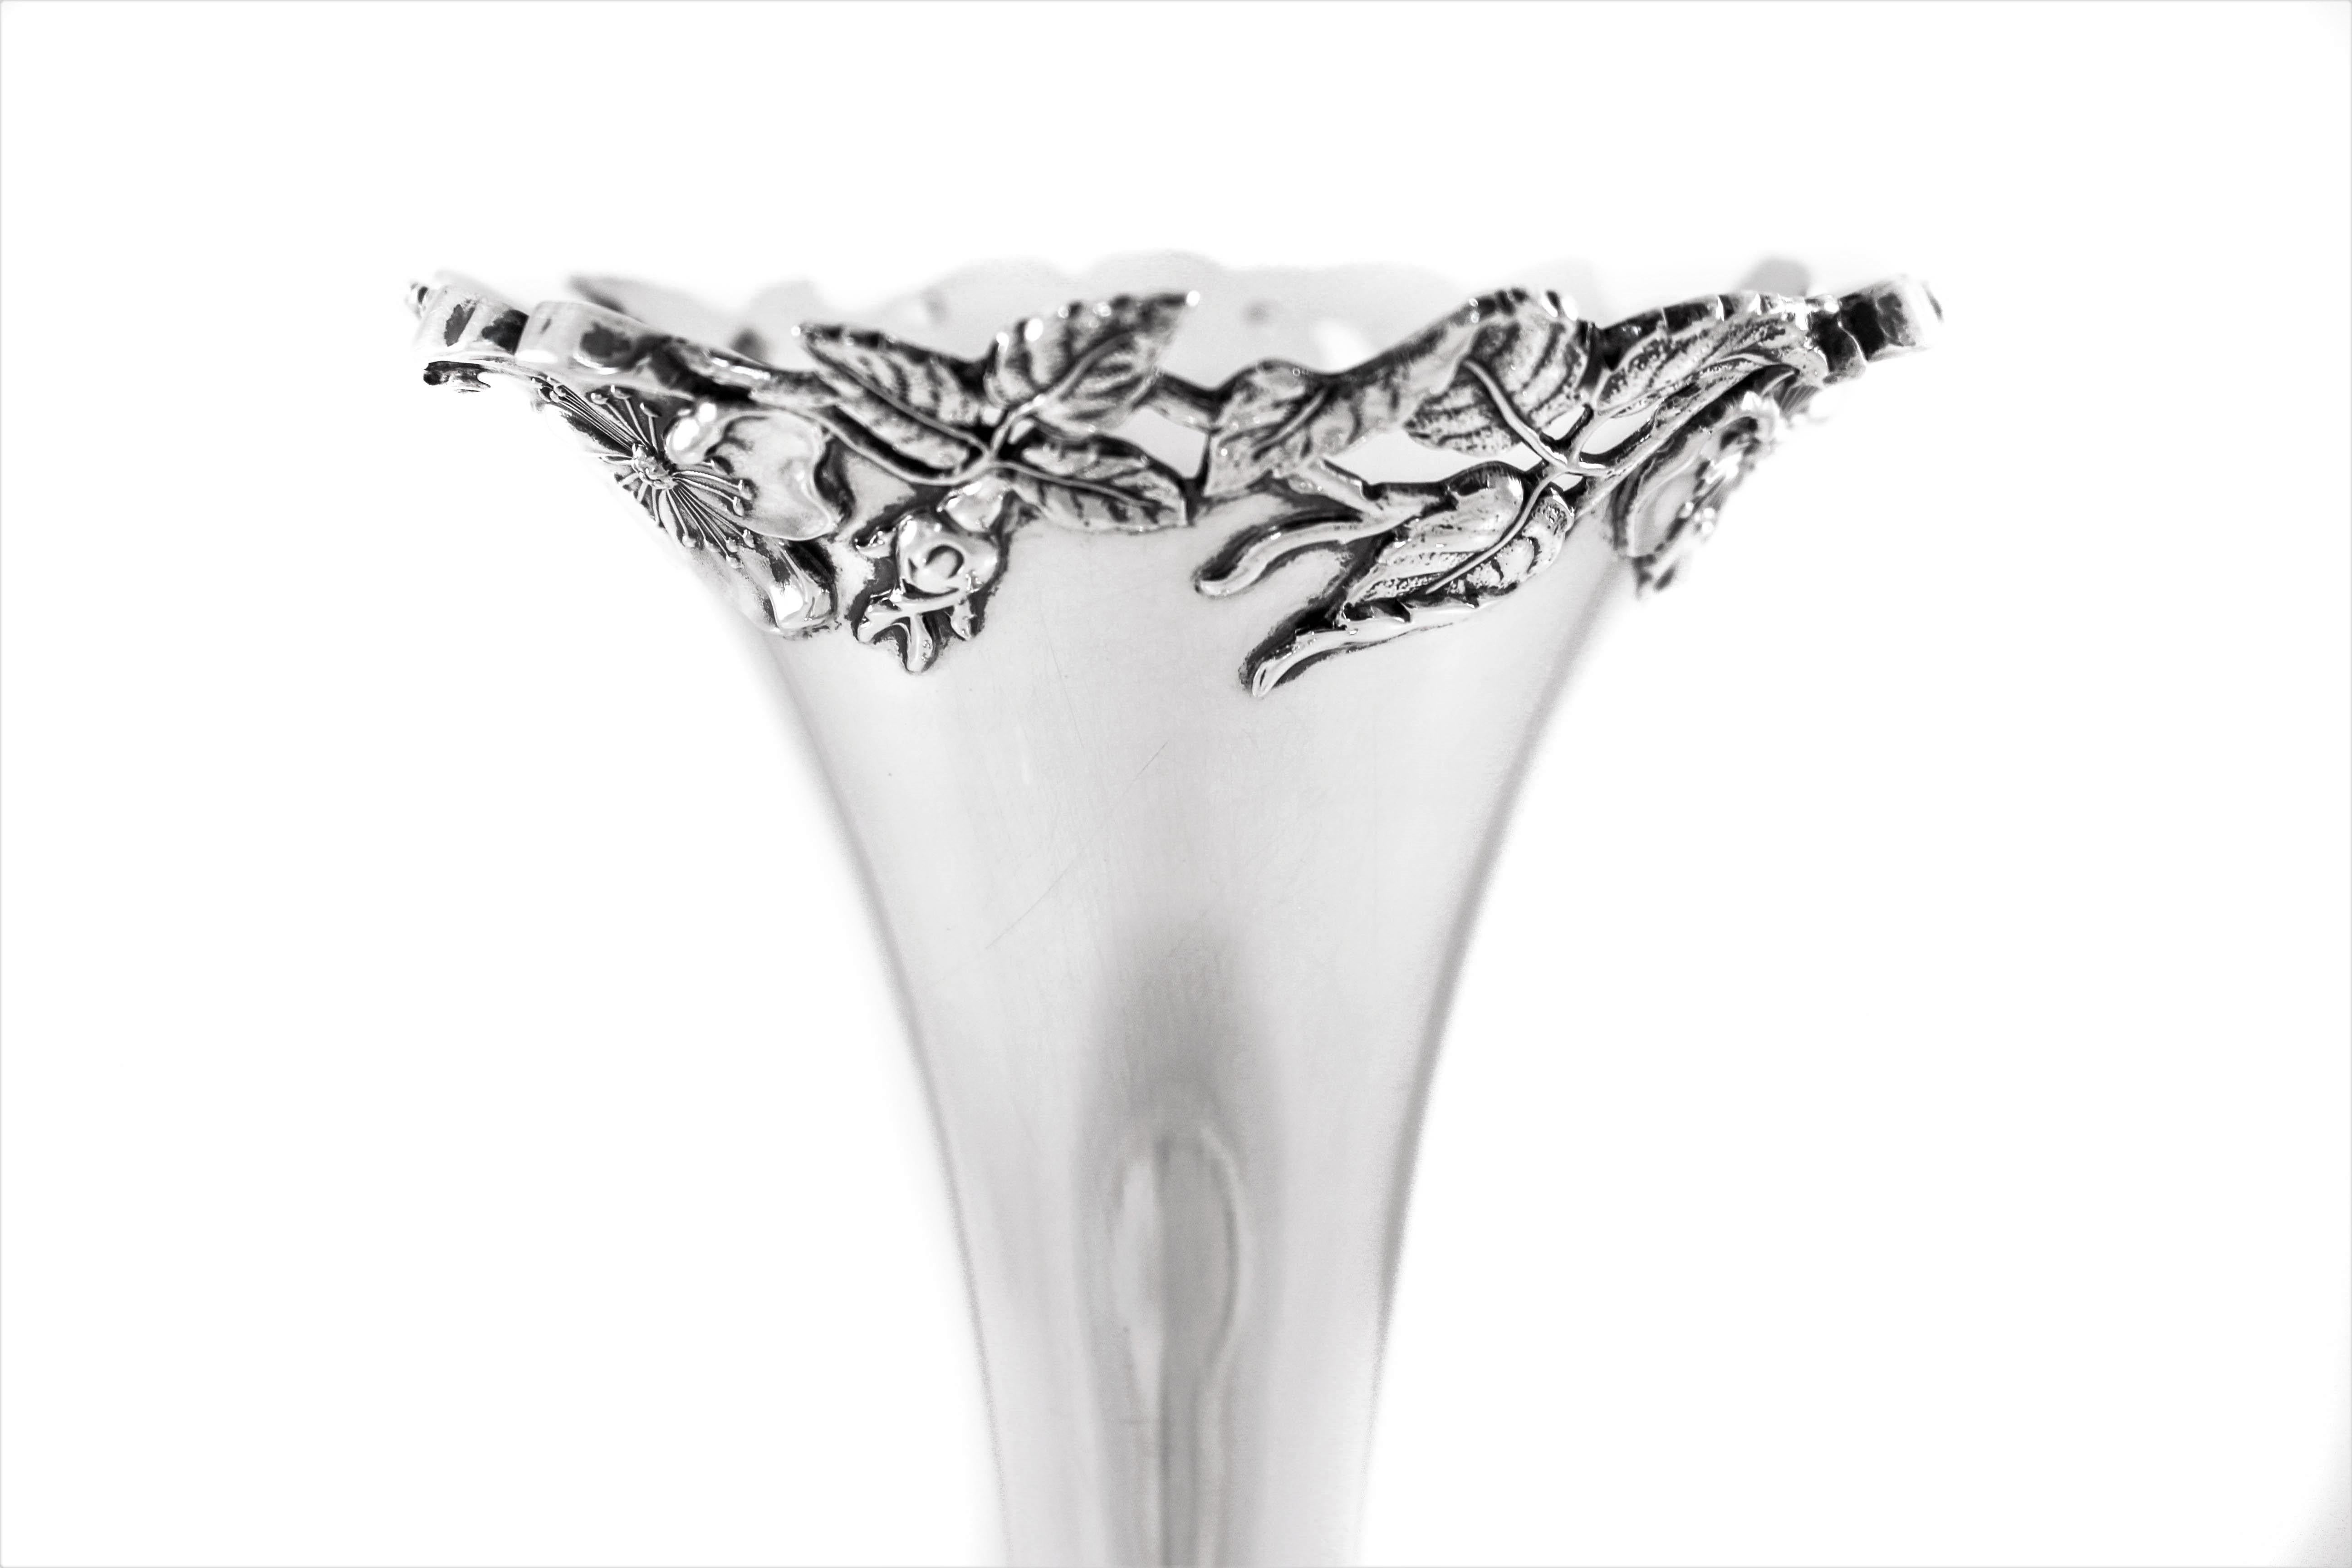 We are proud to offer this sterling silver Art Nouveau vase, signed 1895. Over 125 years old, this vase was made during Grover Cleveland’s presidency.
Art Nouveau was at its pinnacle and this piece is the quintessential style of that period. Early